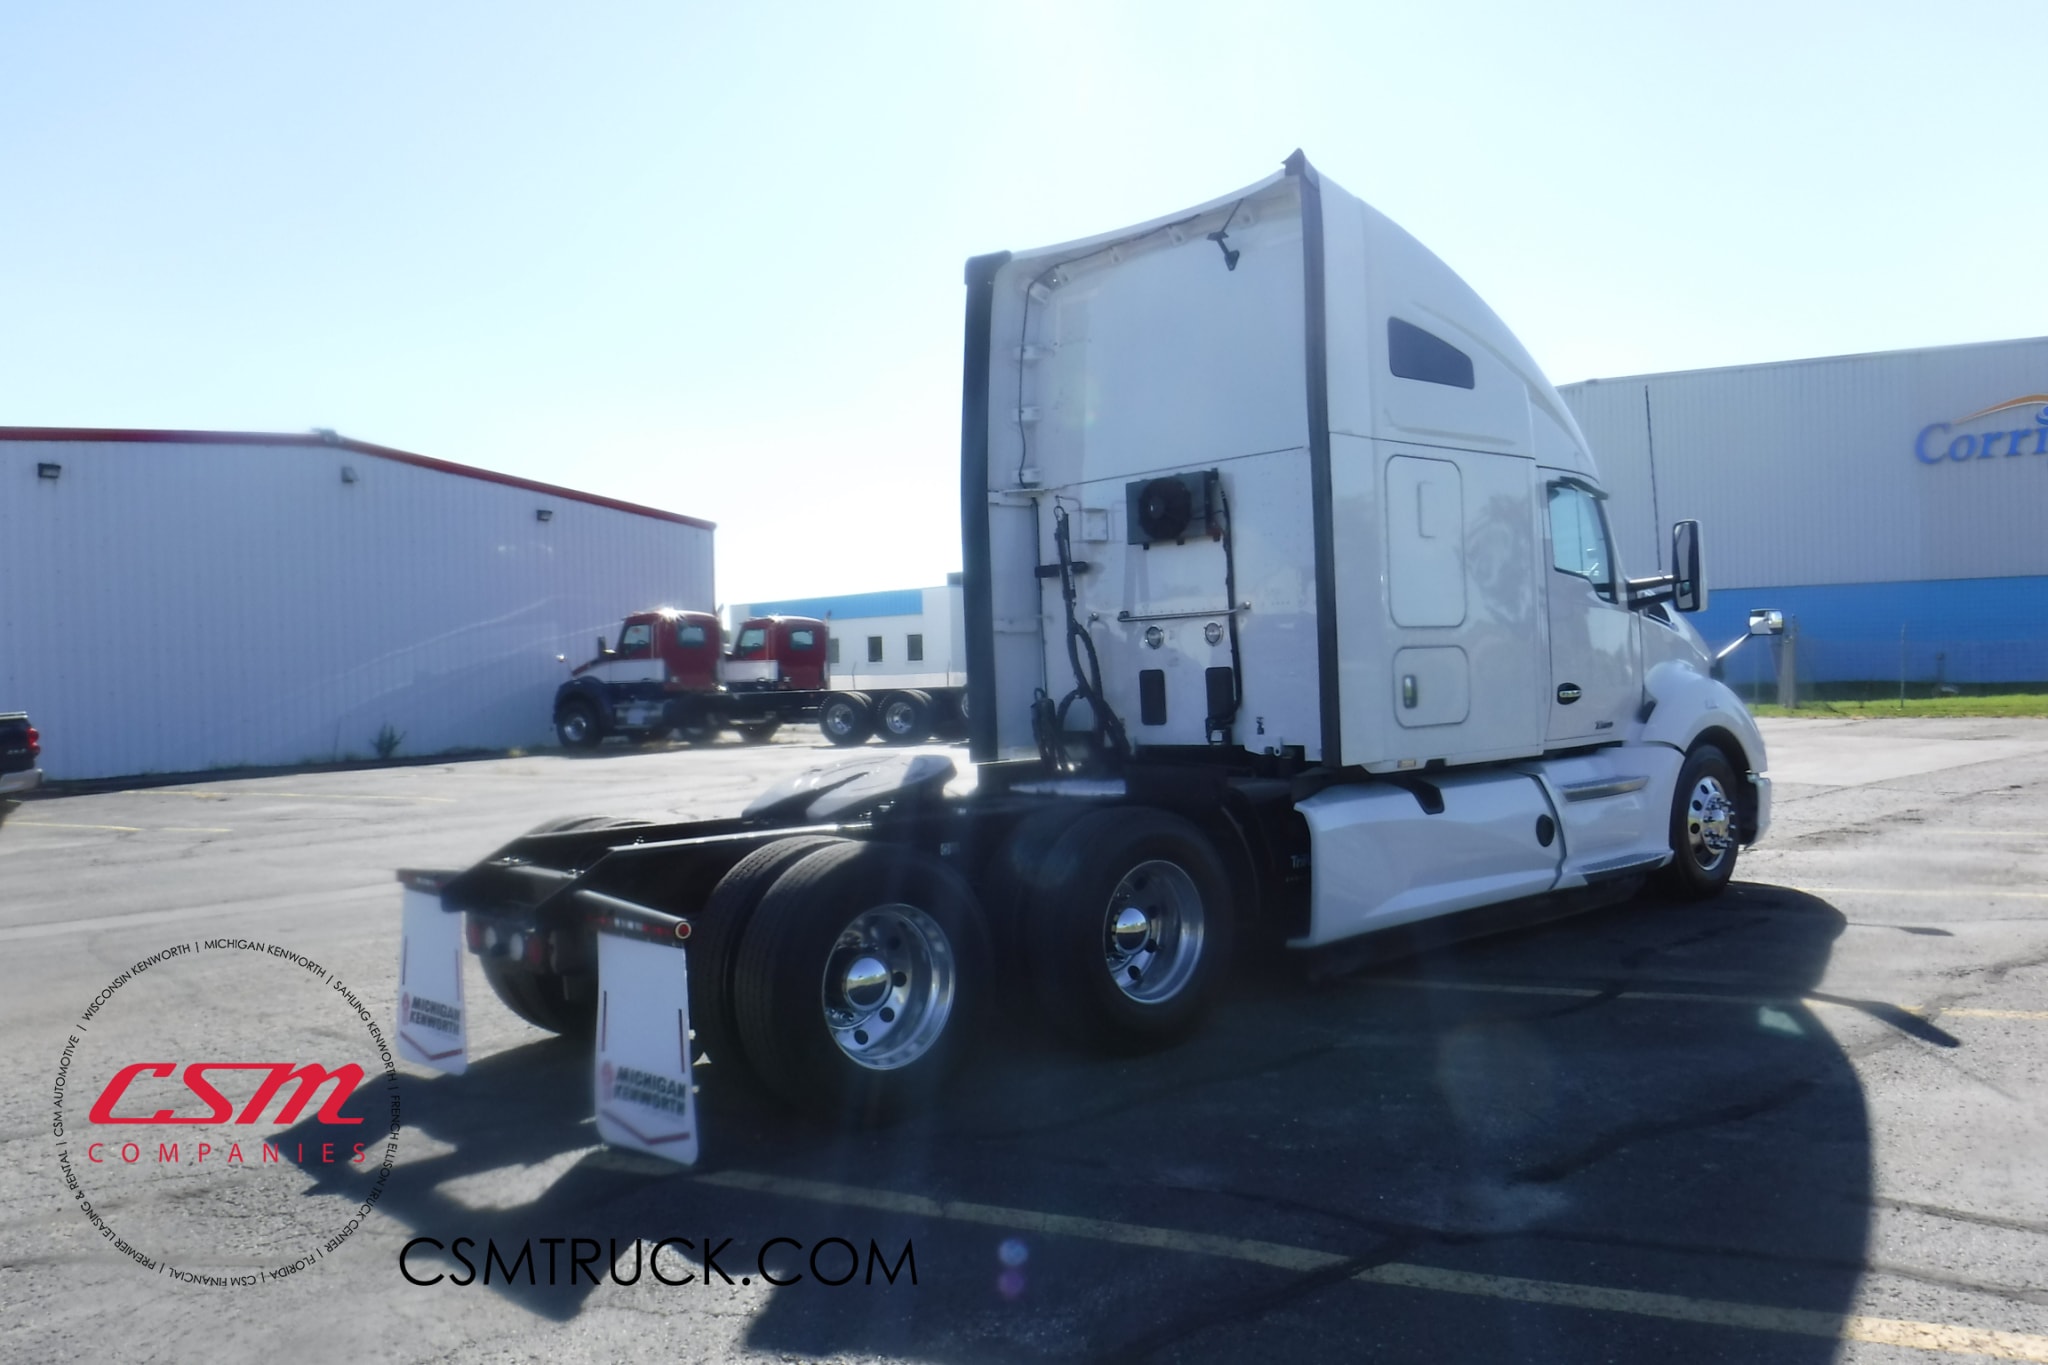 Exterior rear passenger side for this 2020 Kenworth T680 (Stock number: ULJ354559)